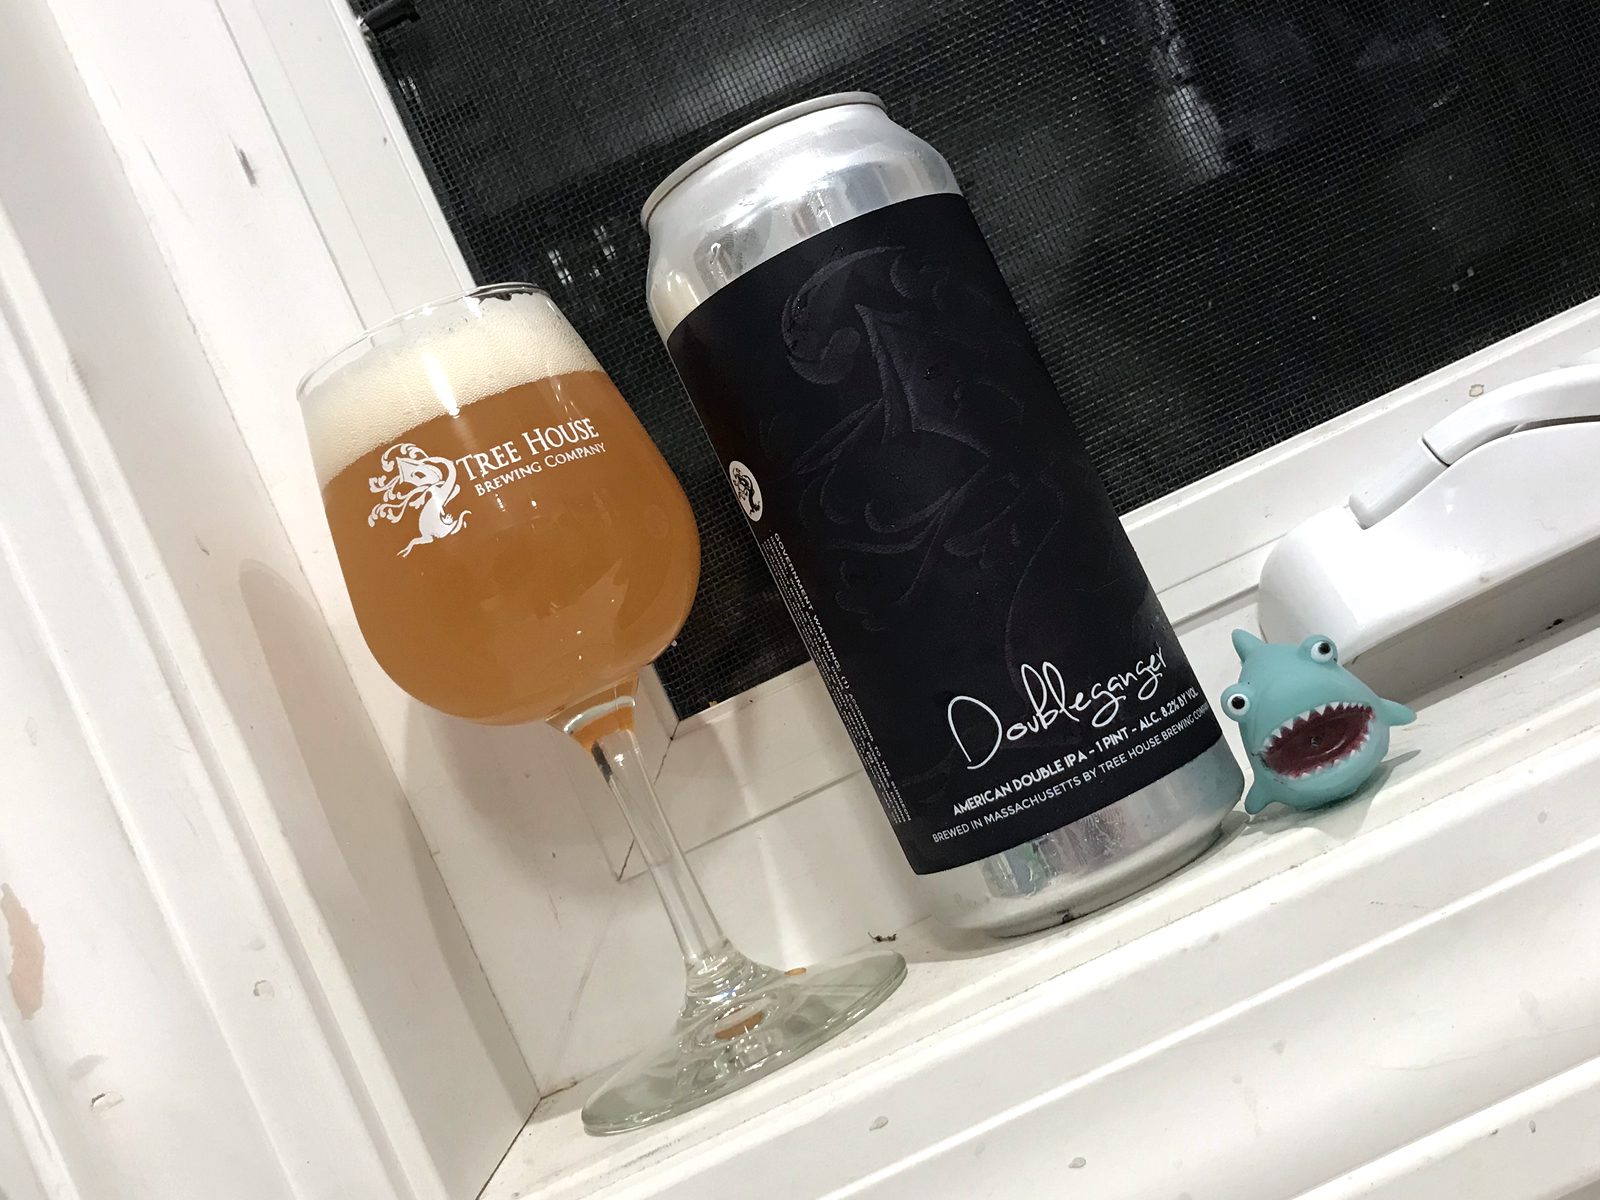 Tree House Brewing Company: DoubleGanger